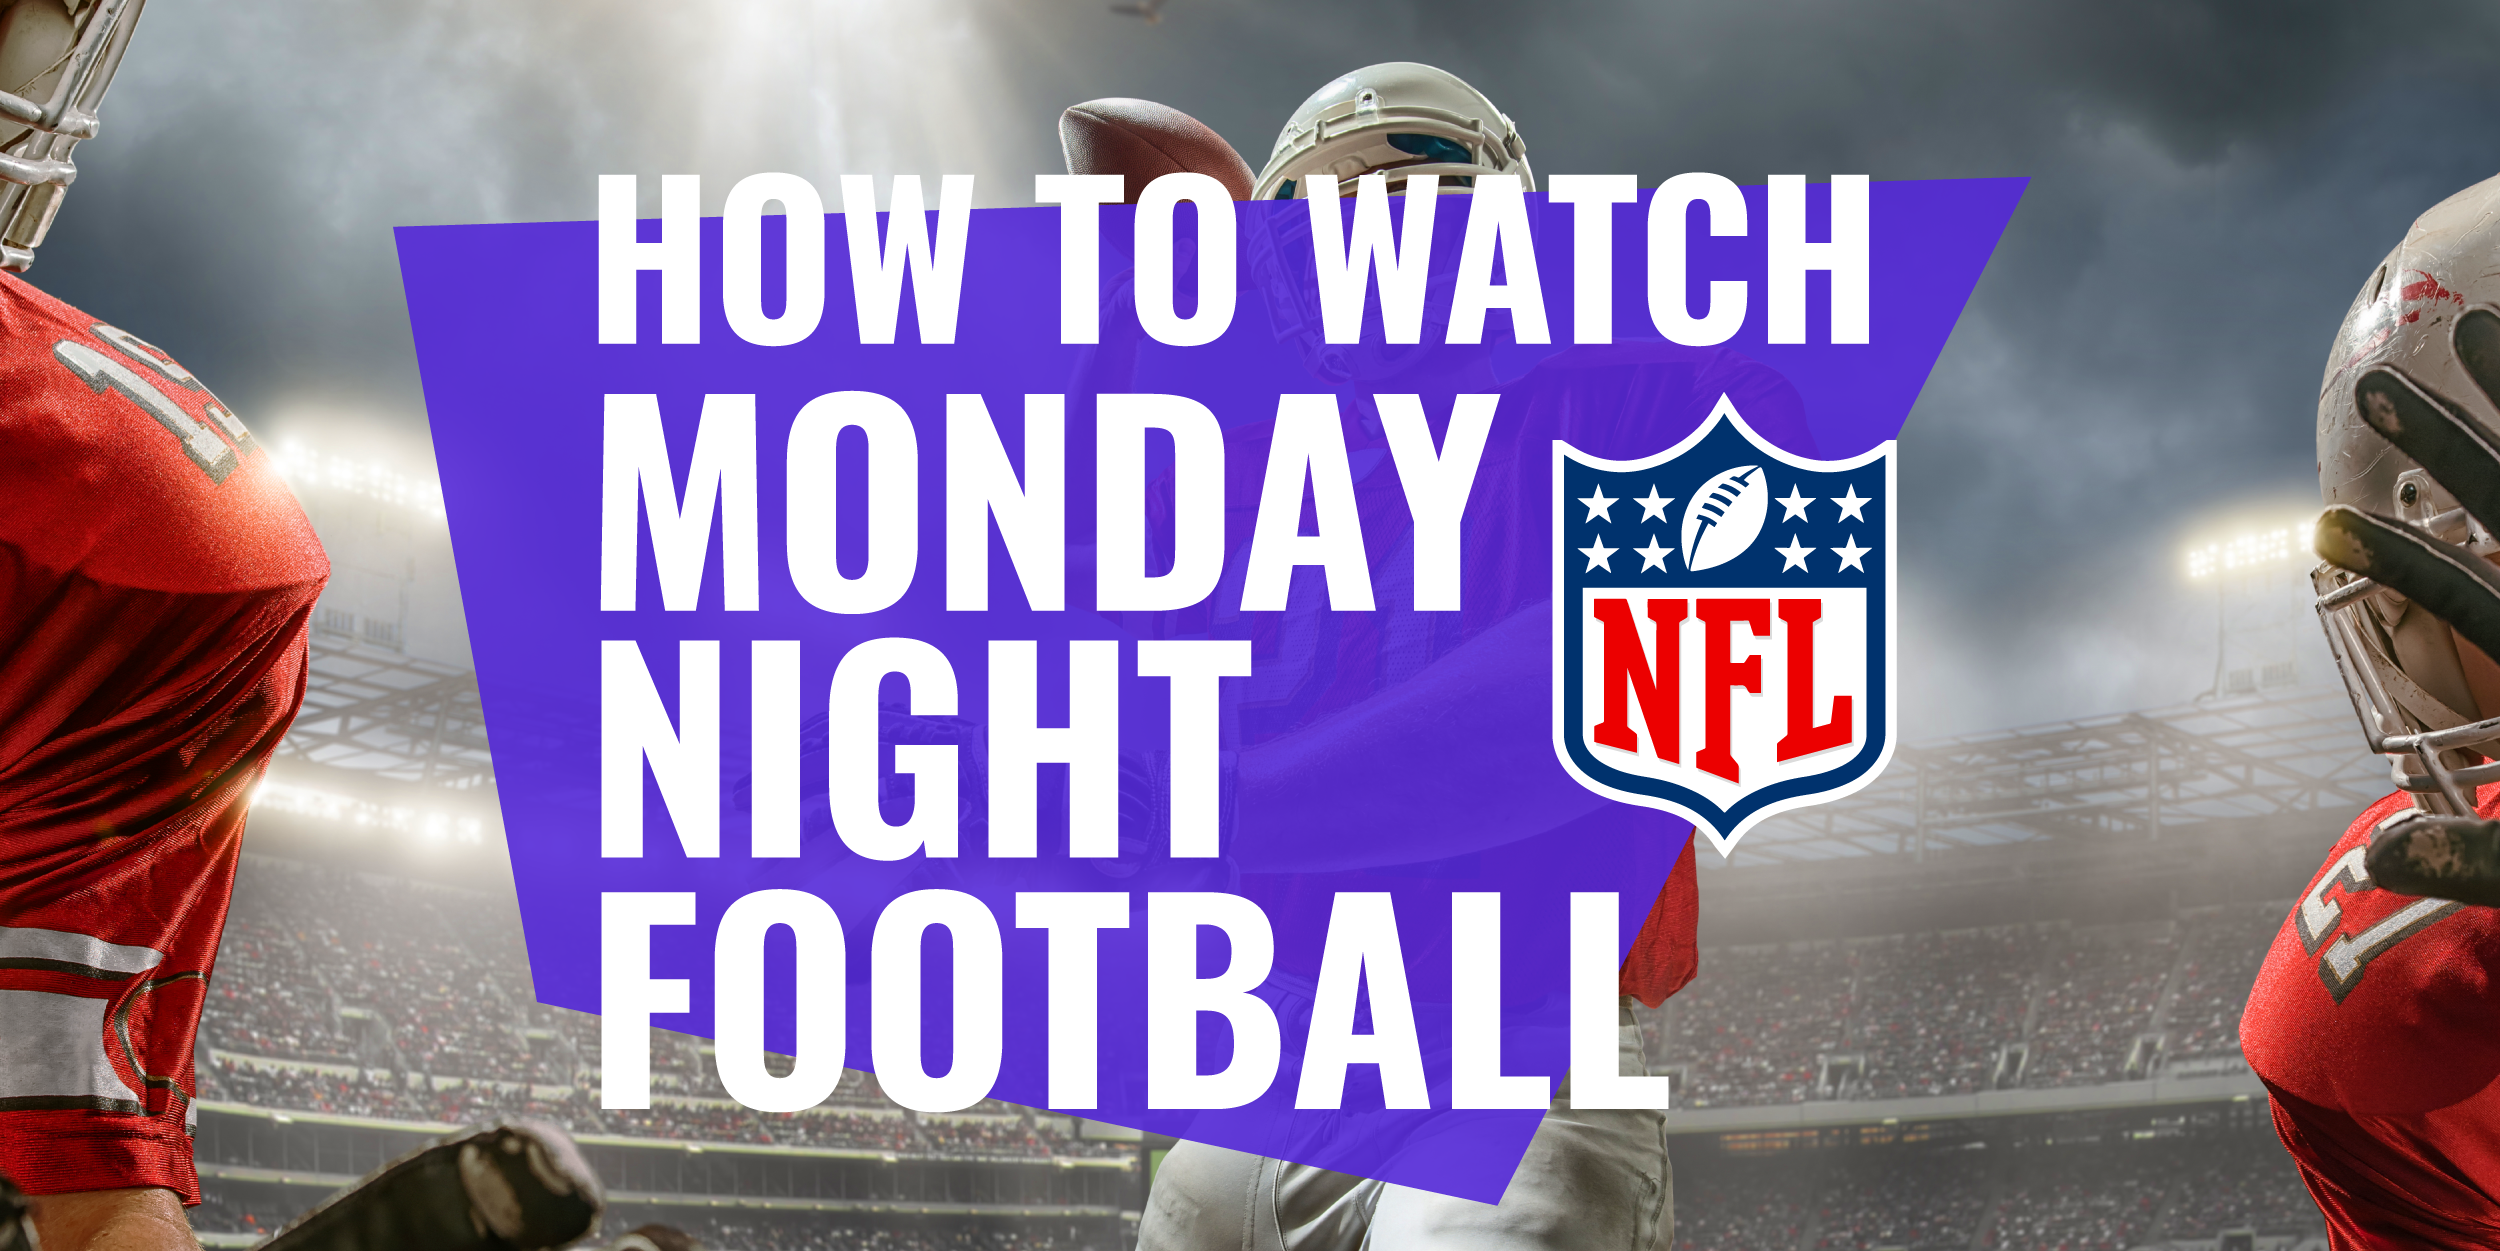 is there a monday night football game tomorrow night